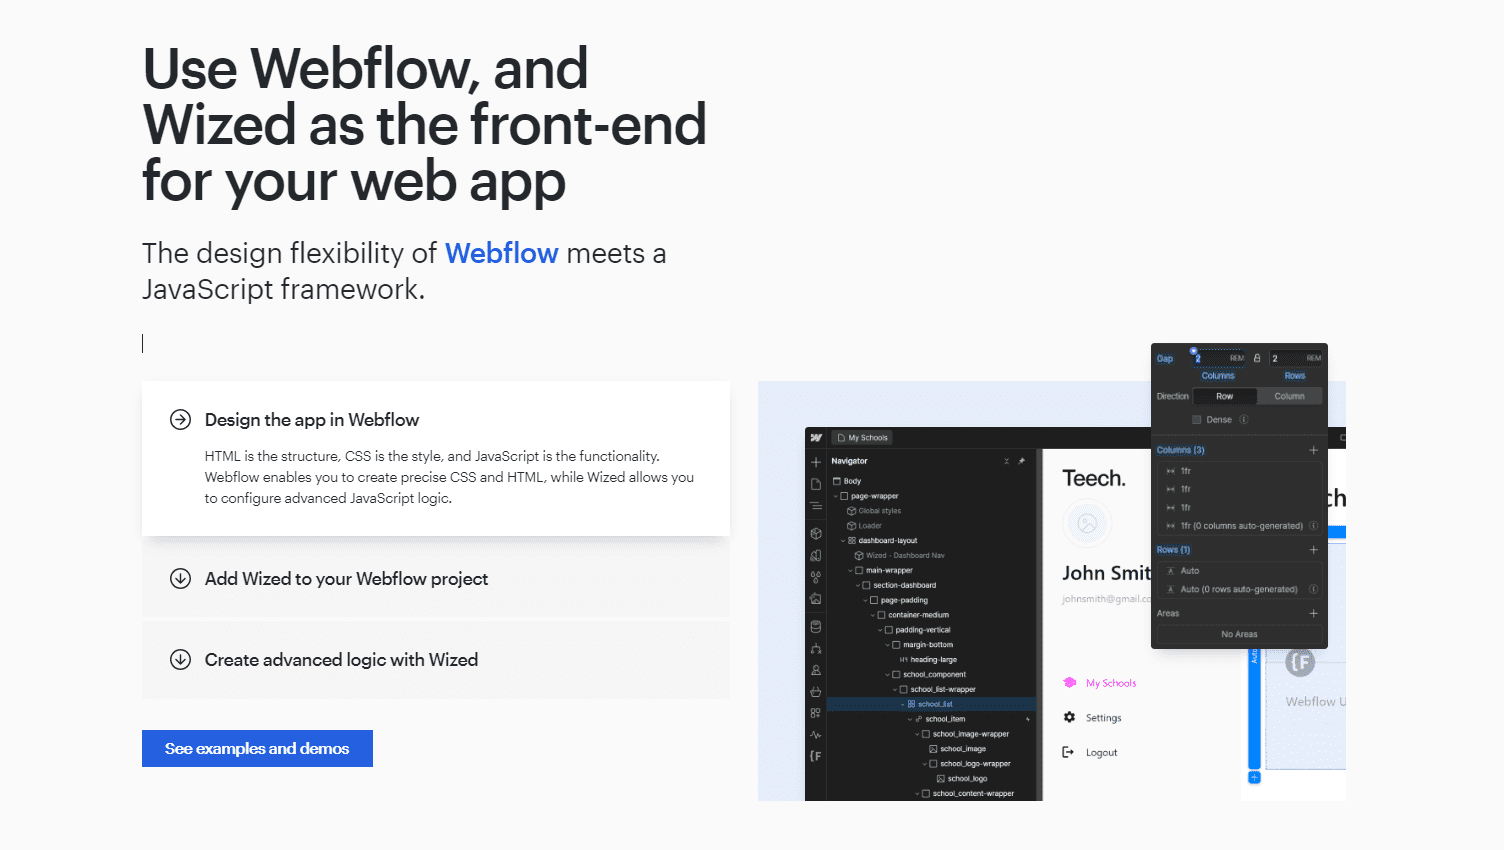 wized using webflow as a no code app builder for web apps